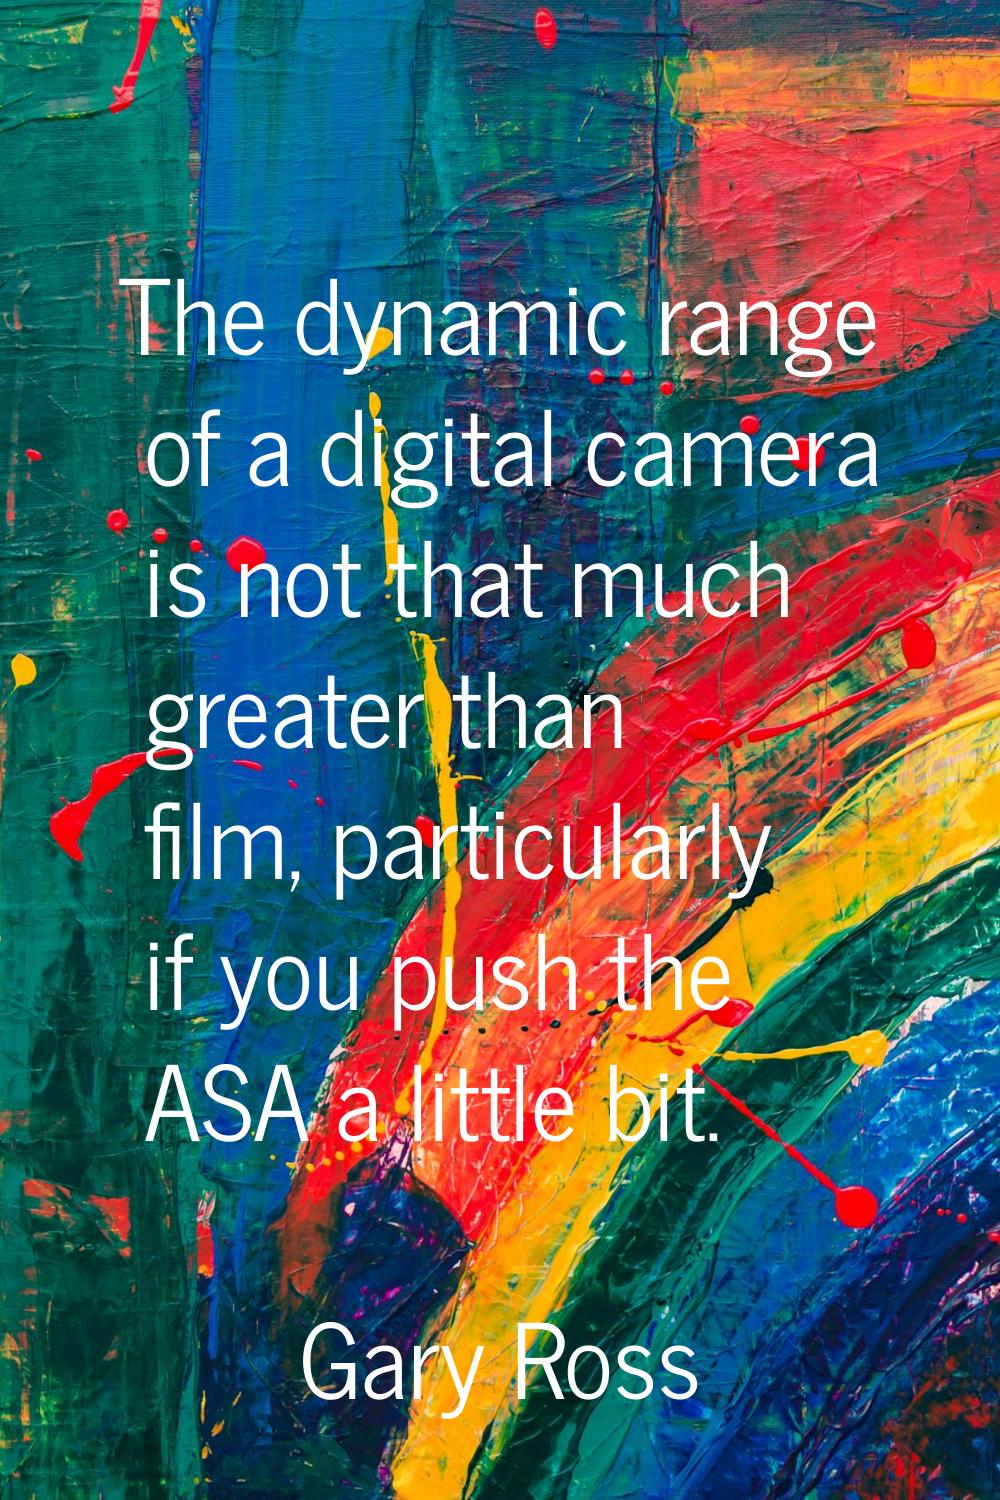 The dynamic range of a digital camera is not that much greater than film, particularly if you push 